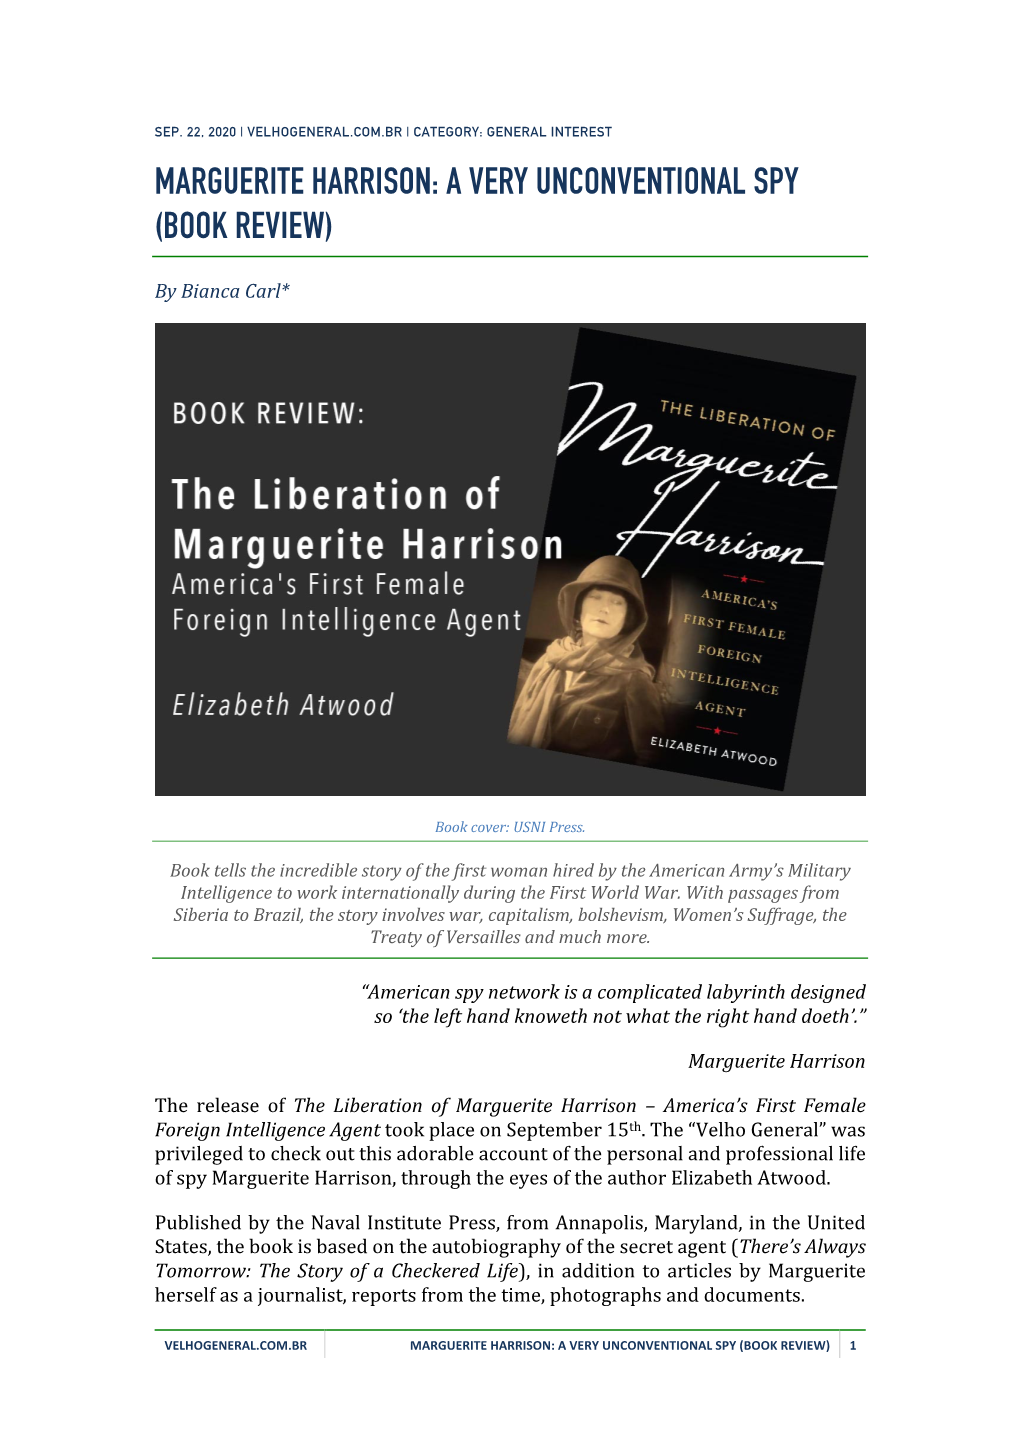 Marguerite Harrison: a Very Unconventional Spy (Book Review)